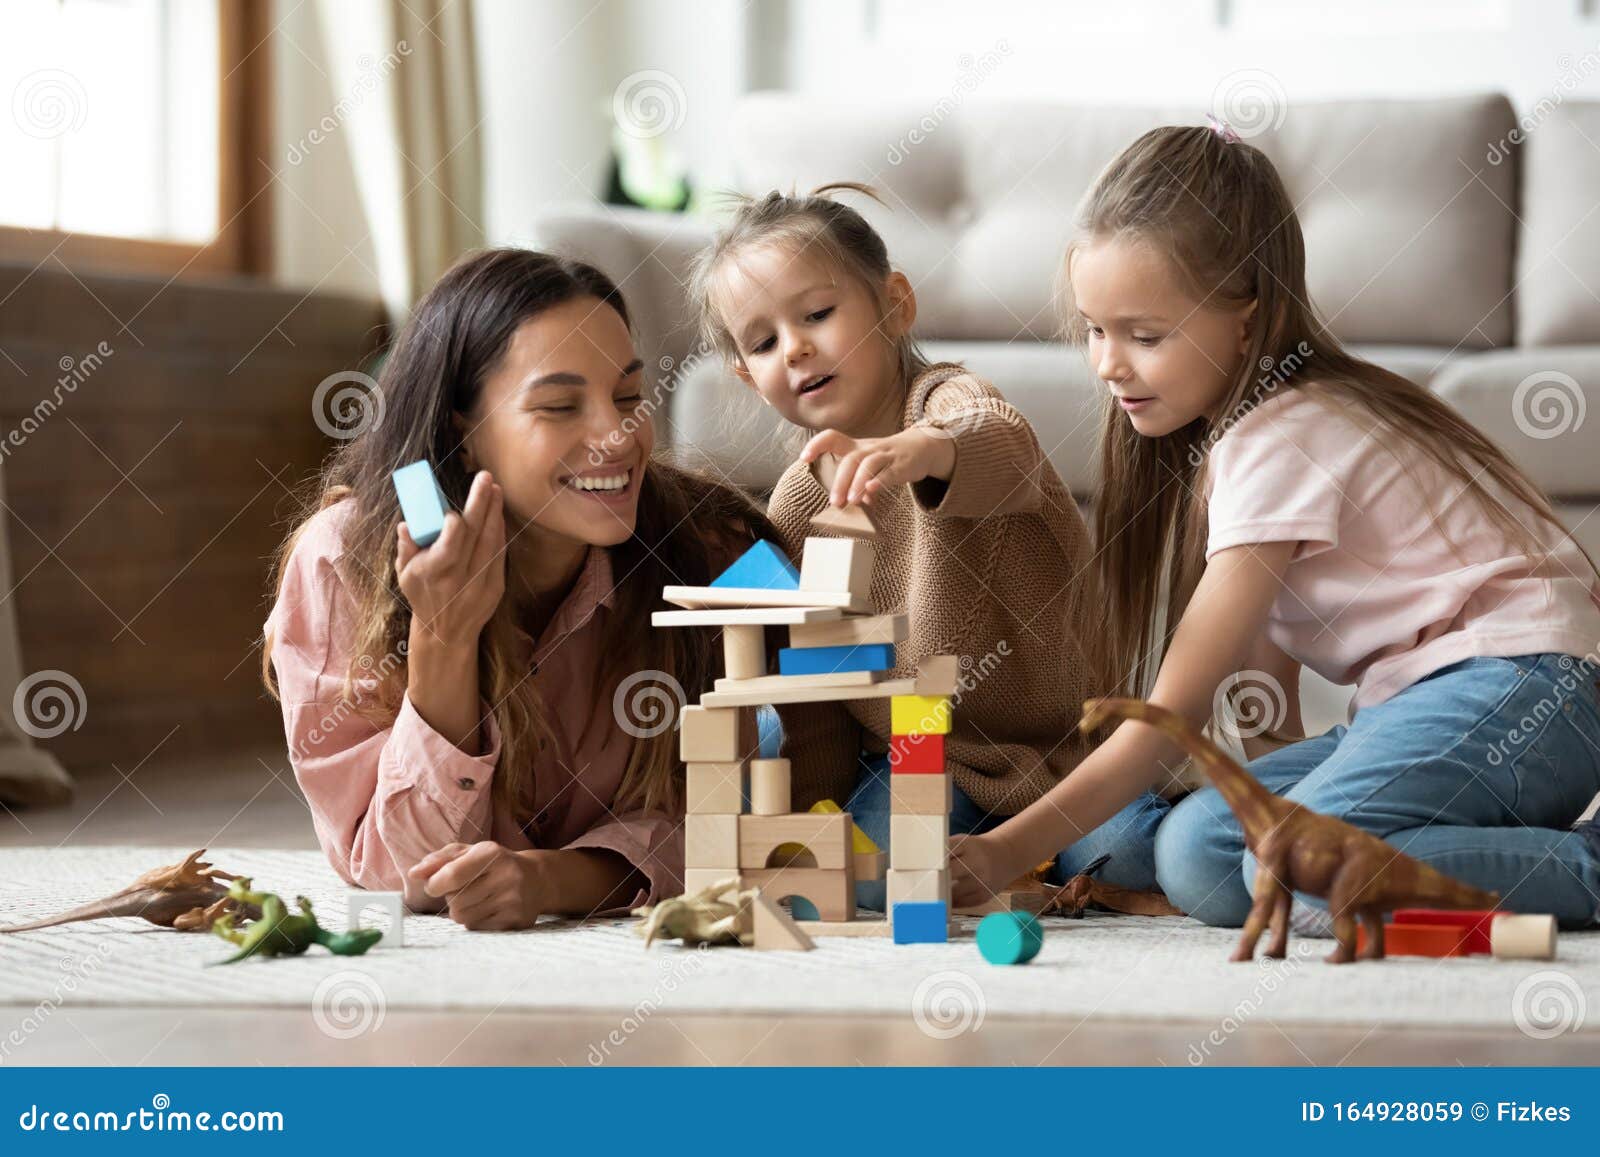 happy mum with kids daughters playing toys on floor